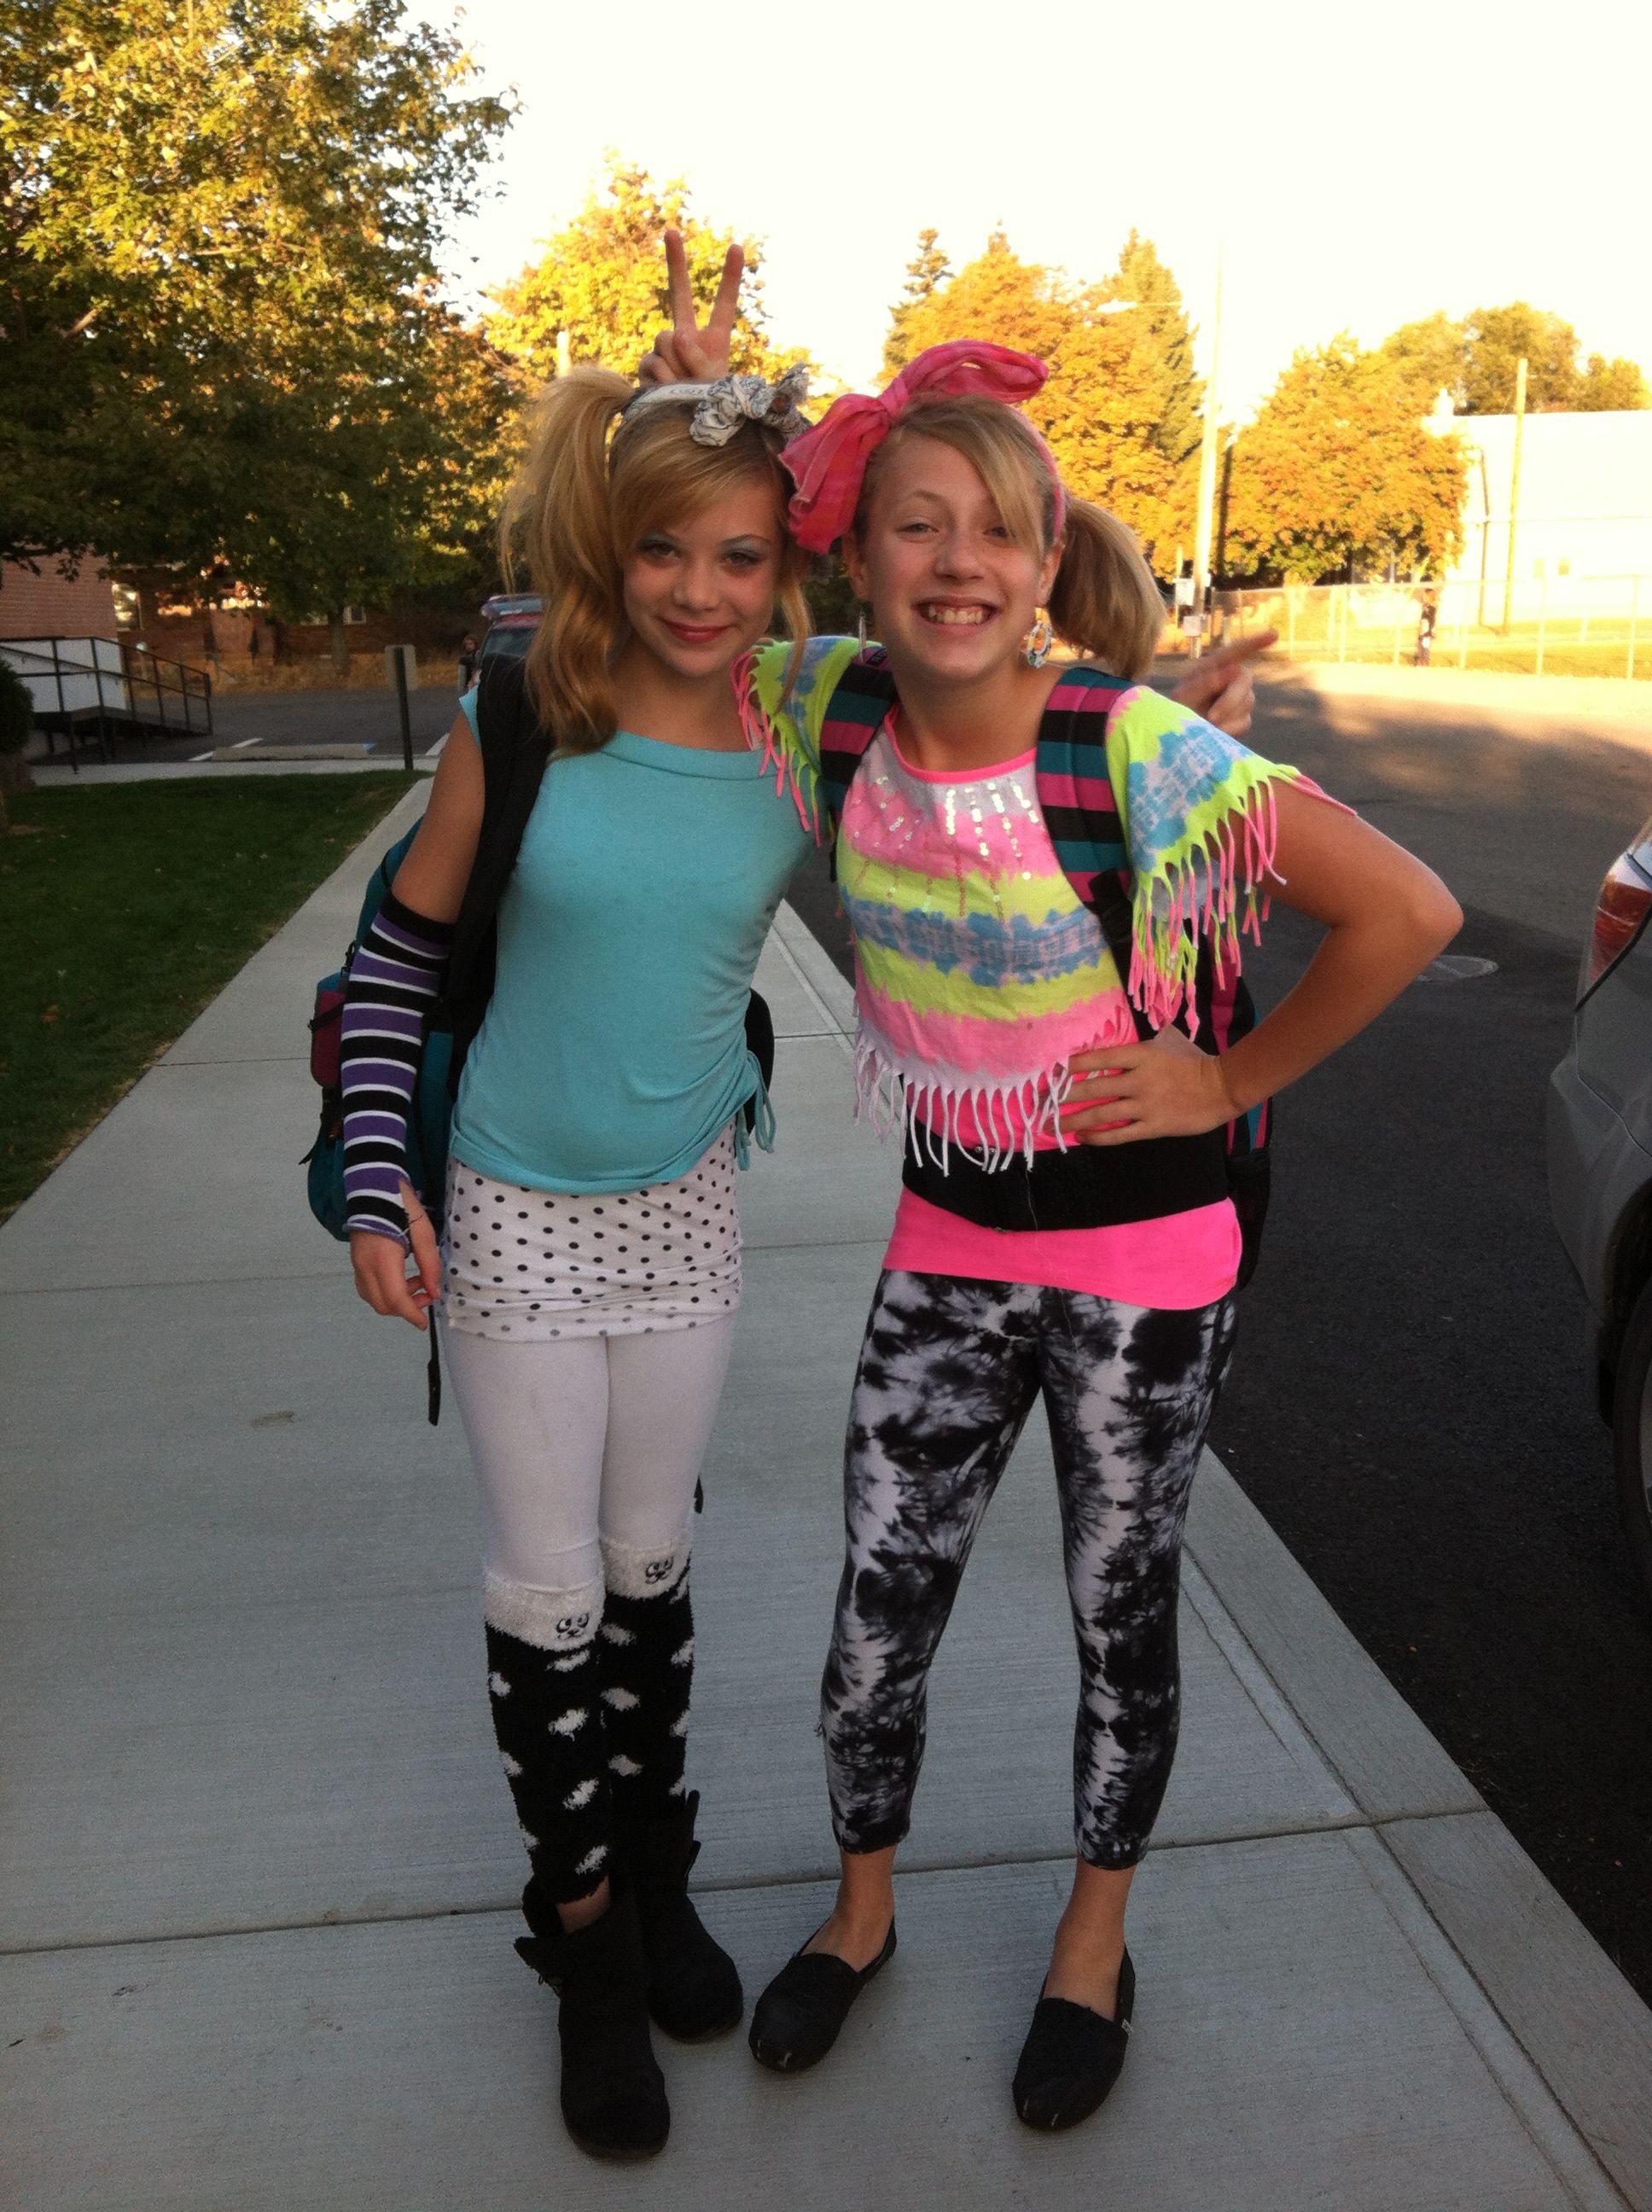 80s dress up ideas for school